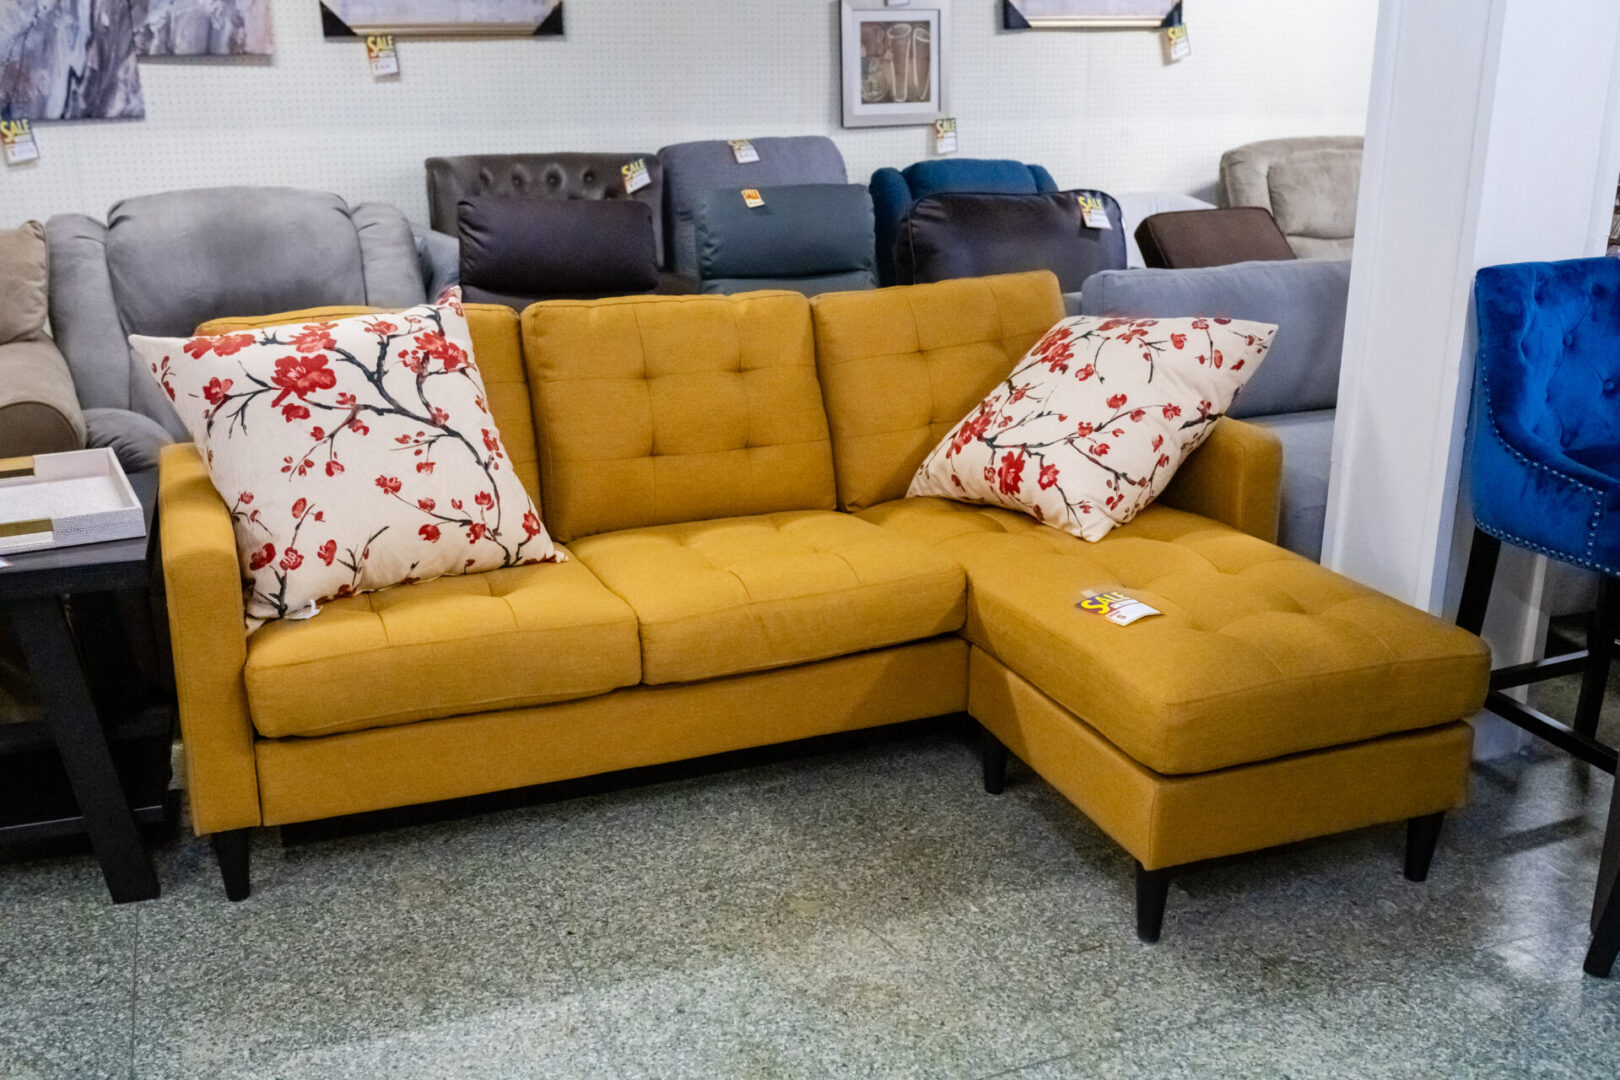 A yellow couch with two pillows on it